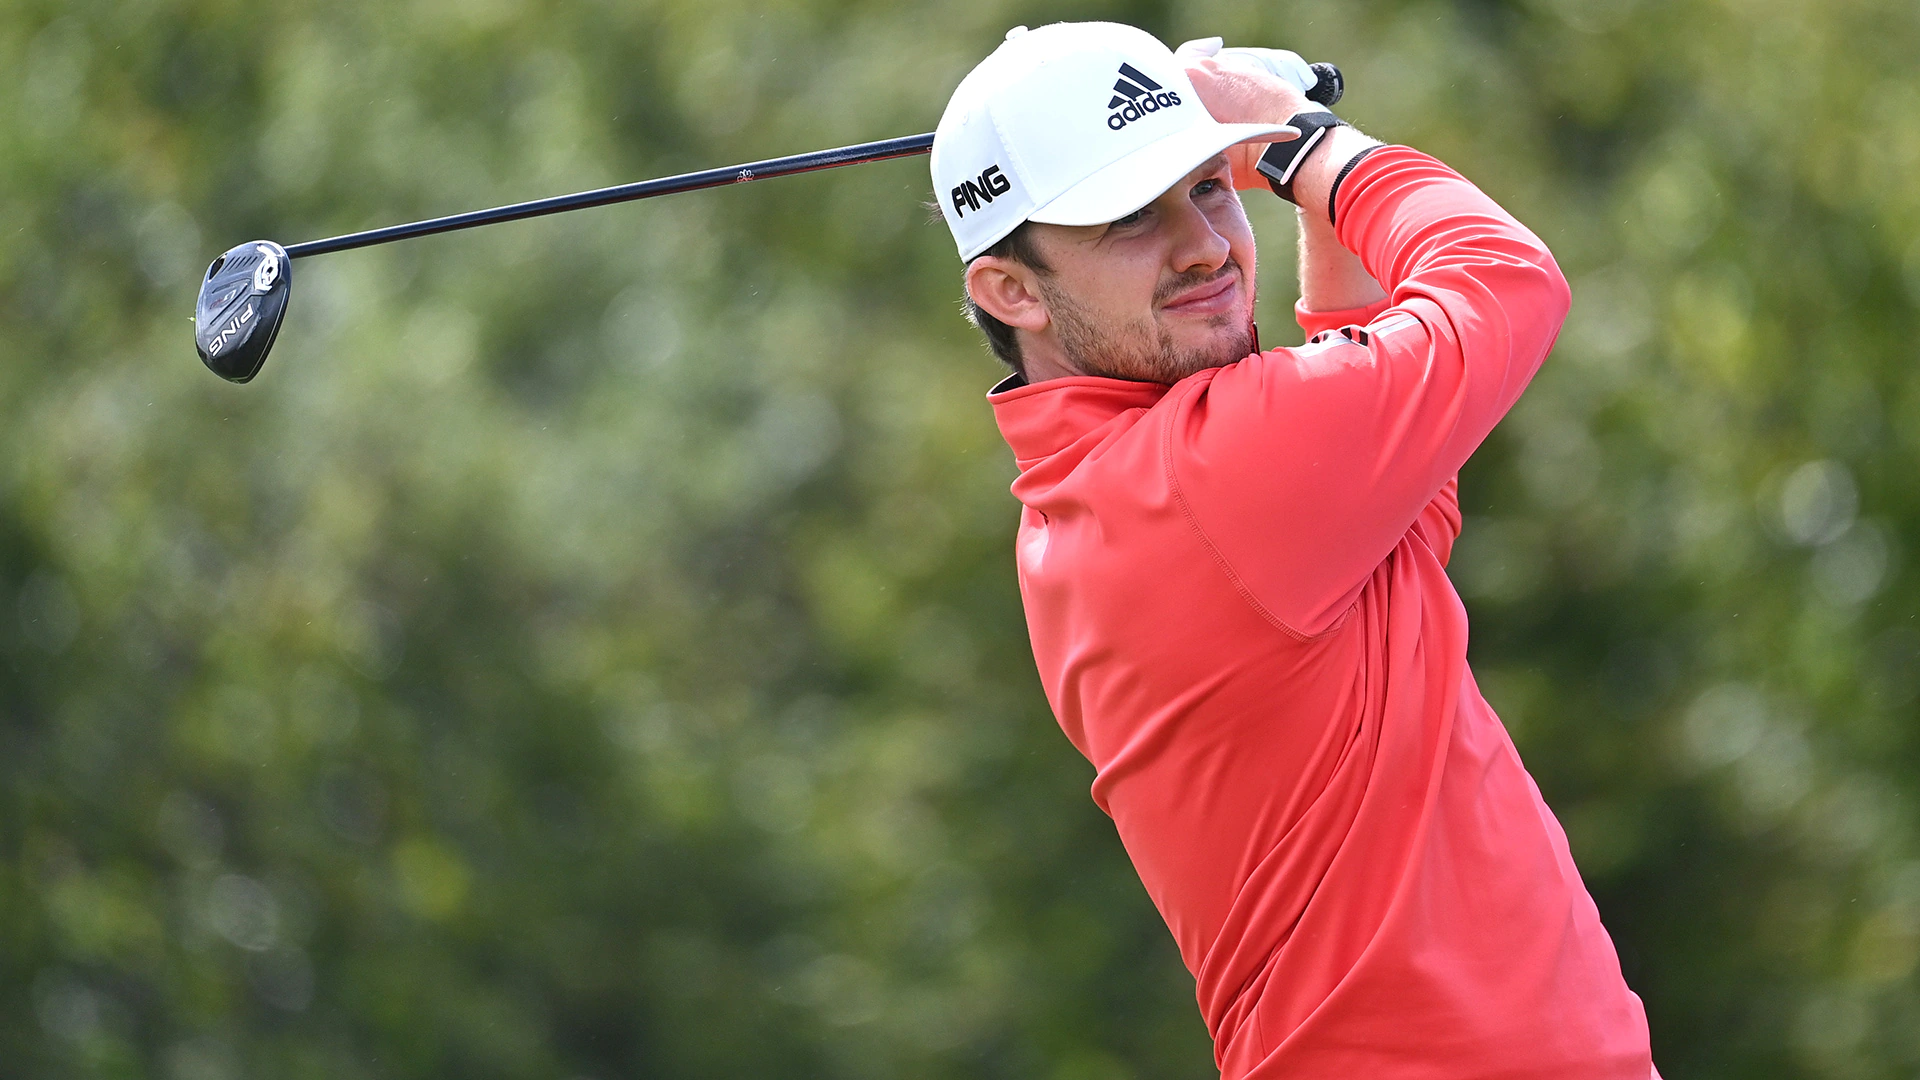 Connor Syme, Sebastian Soderberg share 54-hole lead at Wales Open